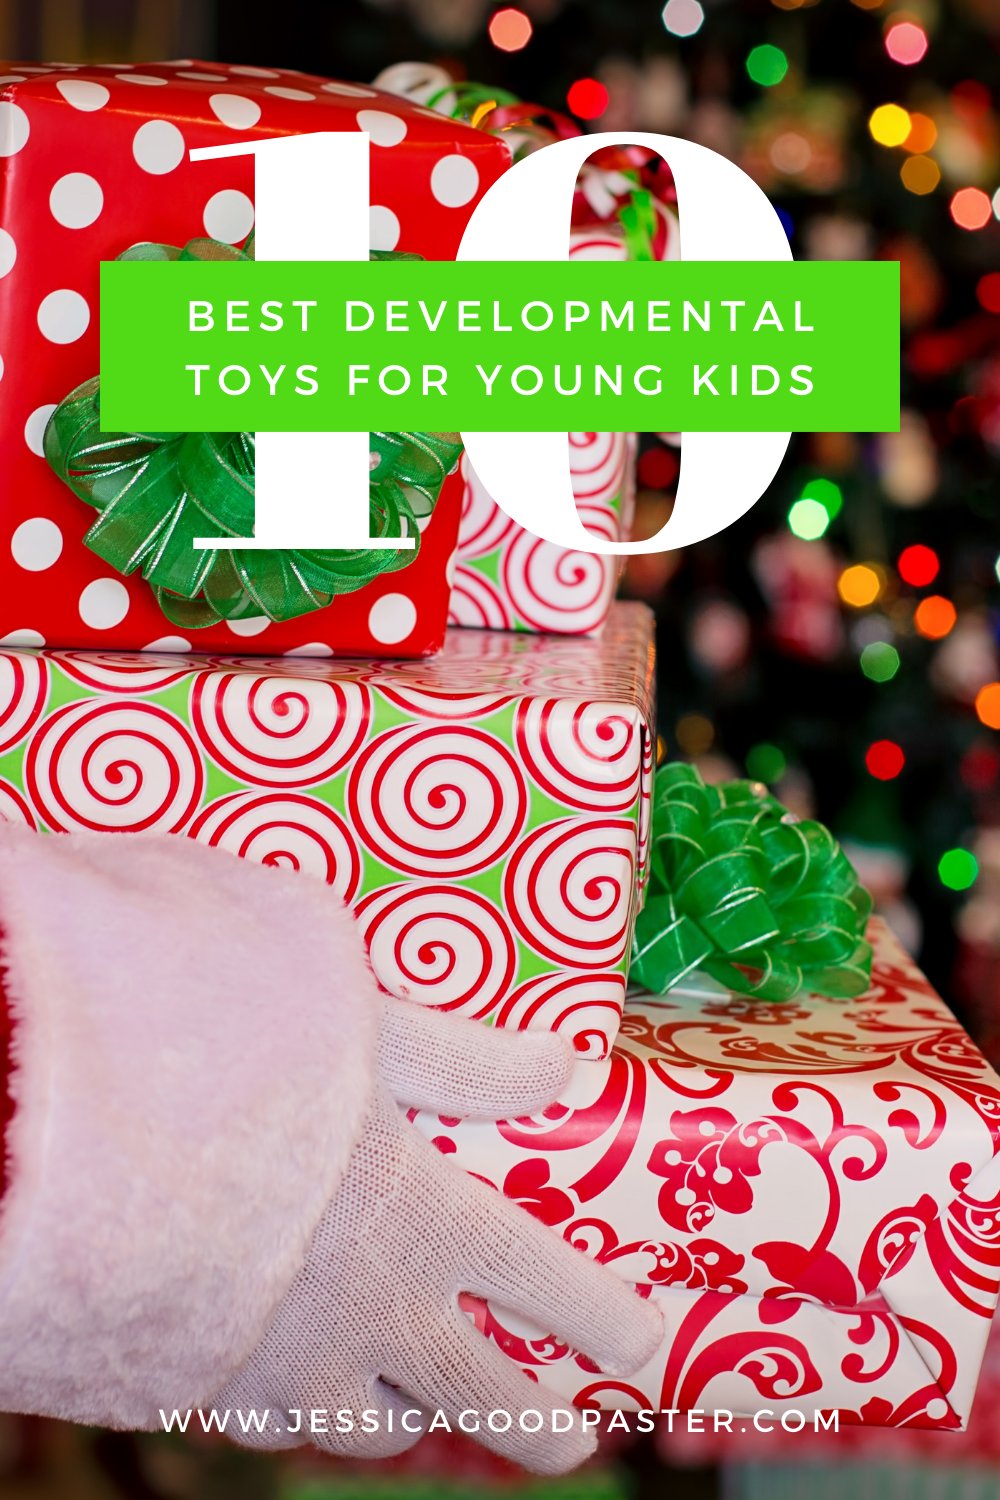 10 Best Developmental Toys for Young Children | Holiday gift ideas for kids! Find the perfect gift for infants, toddlers, and preschoolers while promoting their development and learning. These educational toys are fun and will make everyone happy on Christmas morning! #giftideas #toysforboys #christmasgifts #toddleractivities #preschoolers #speechtherapyactivities #occupationaltherapy #physicaltherapy #giftguide #development